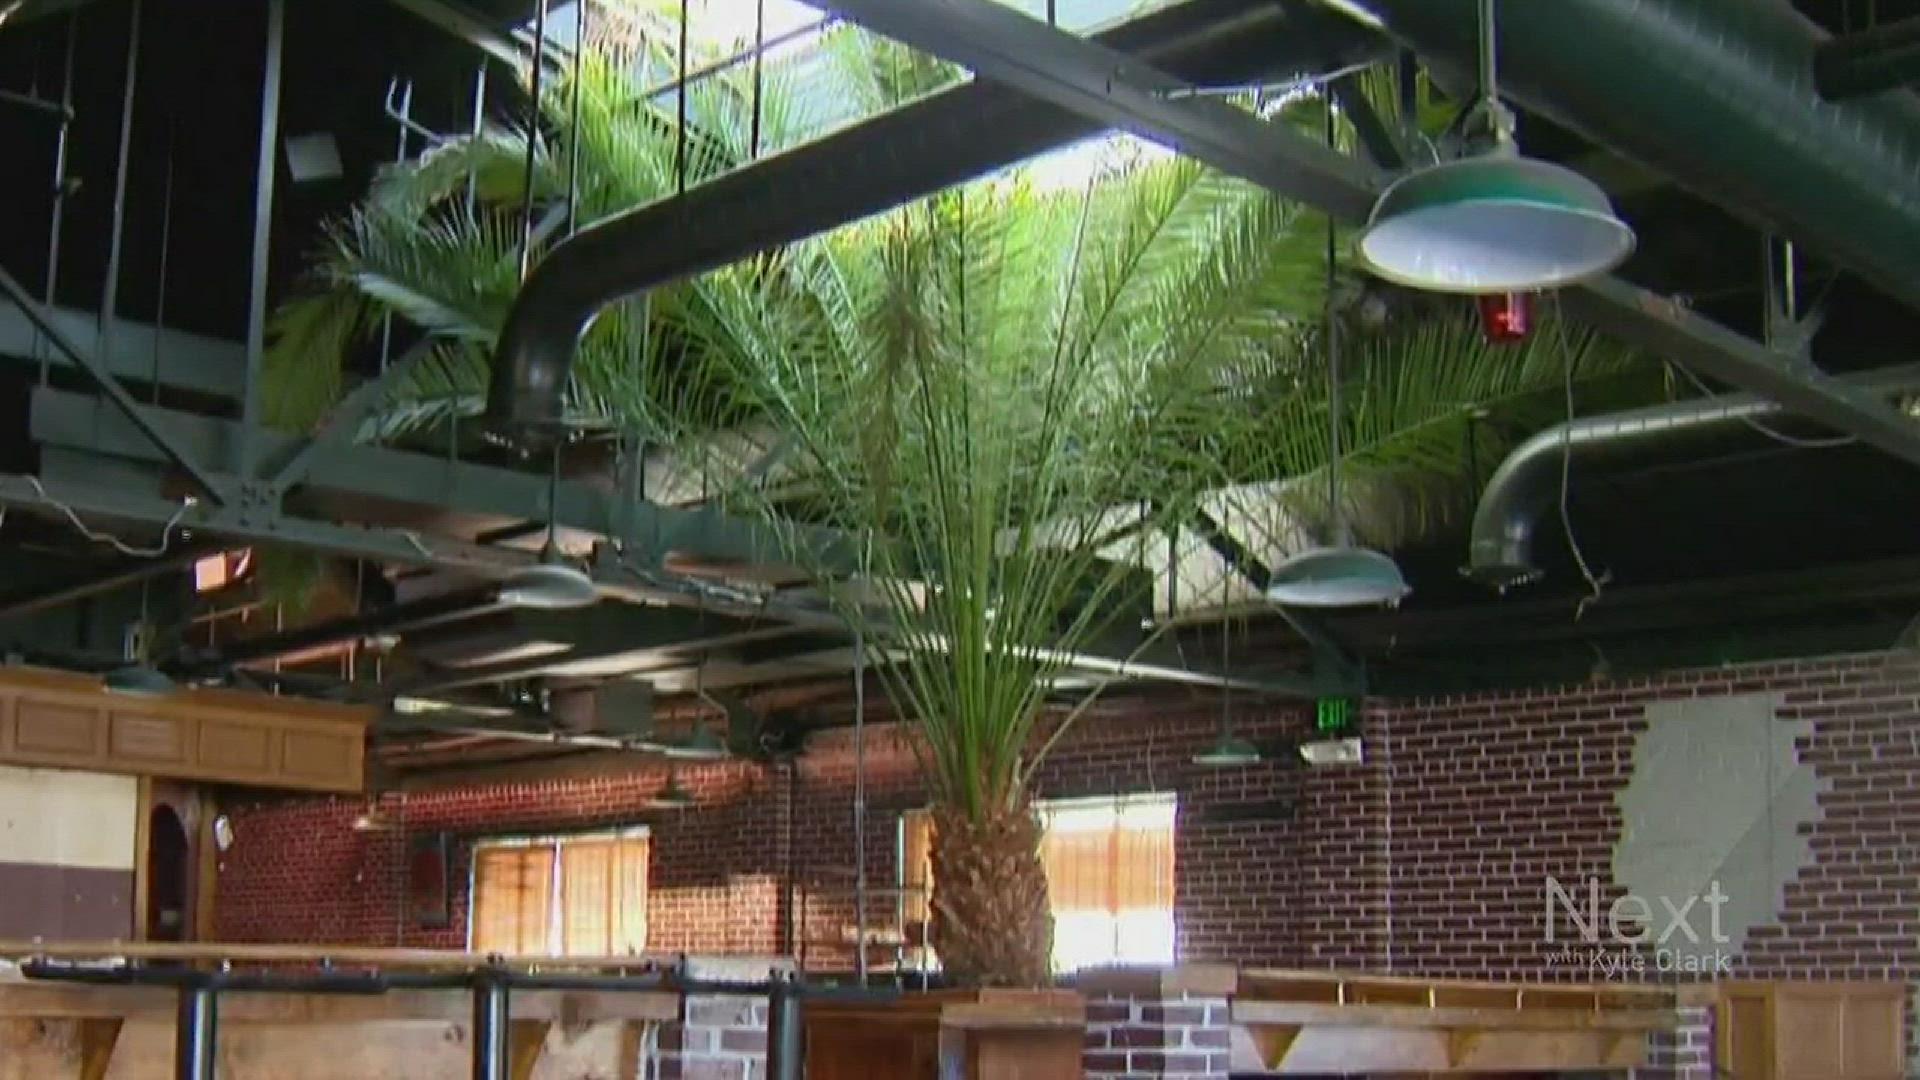 The very prominent palm tree was left behind when Gov's Park closed its doors. It had been sitting in the bar for decades, but will now have a new home downtown.